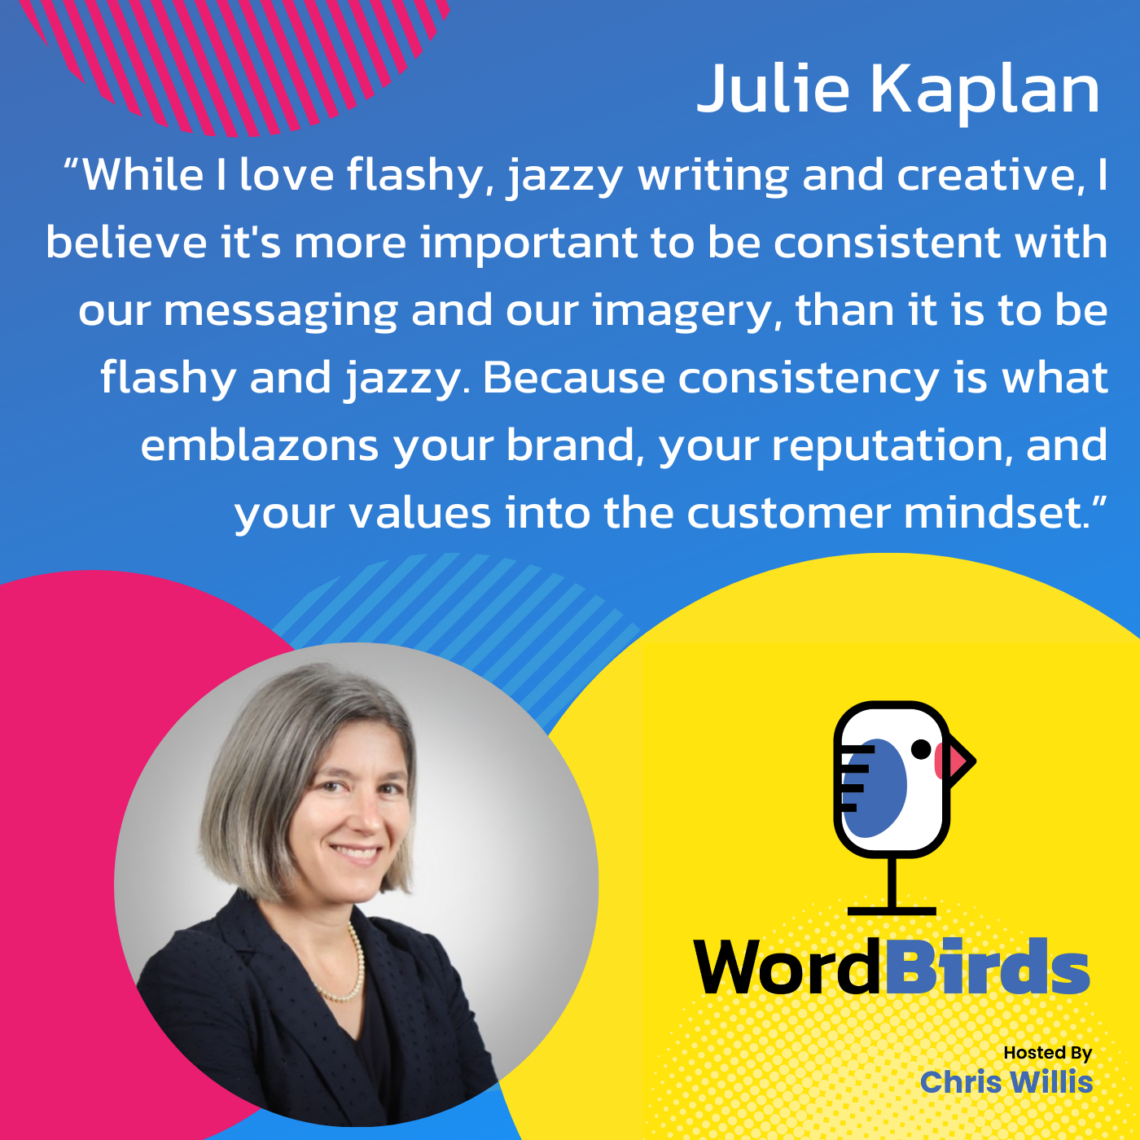 On a blue background there's a quote from Julie Kaplan in white that takes up the majority of the image. The bottom of the image has a headshot image of Julie and the WordBirds Podcast logo.